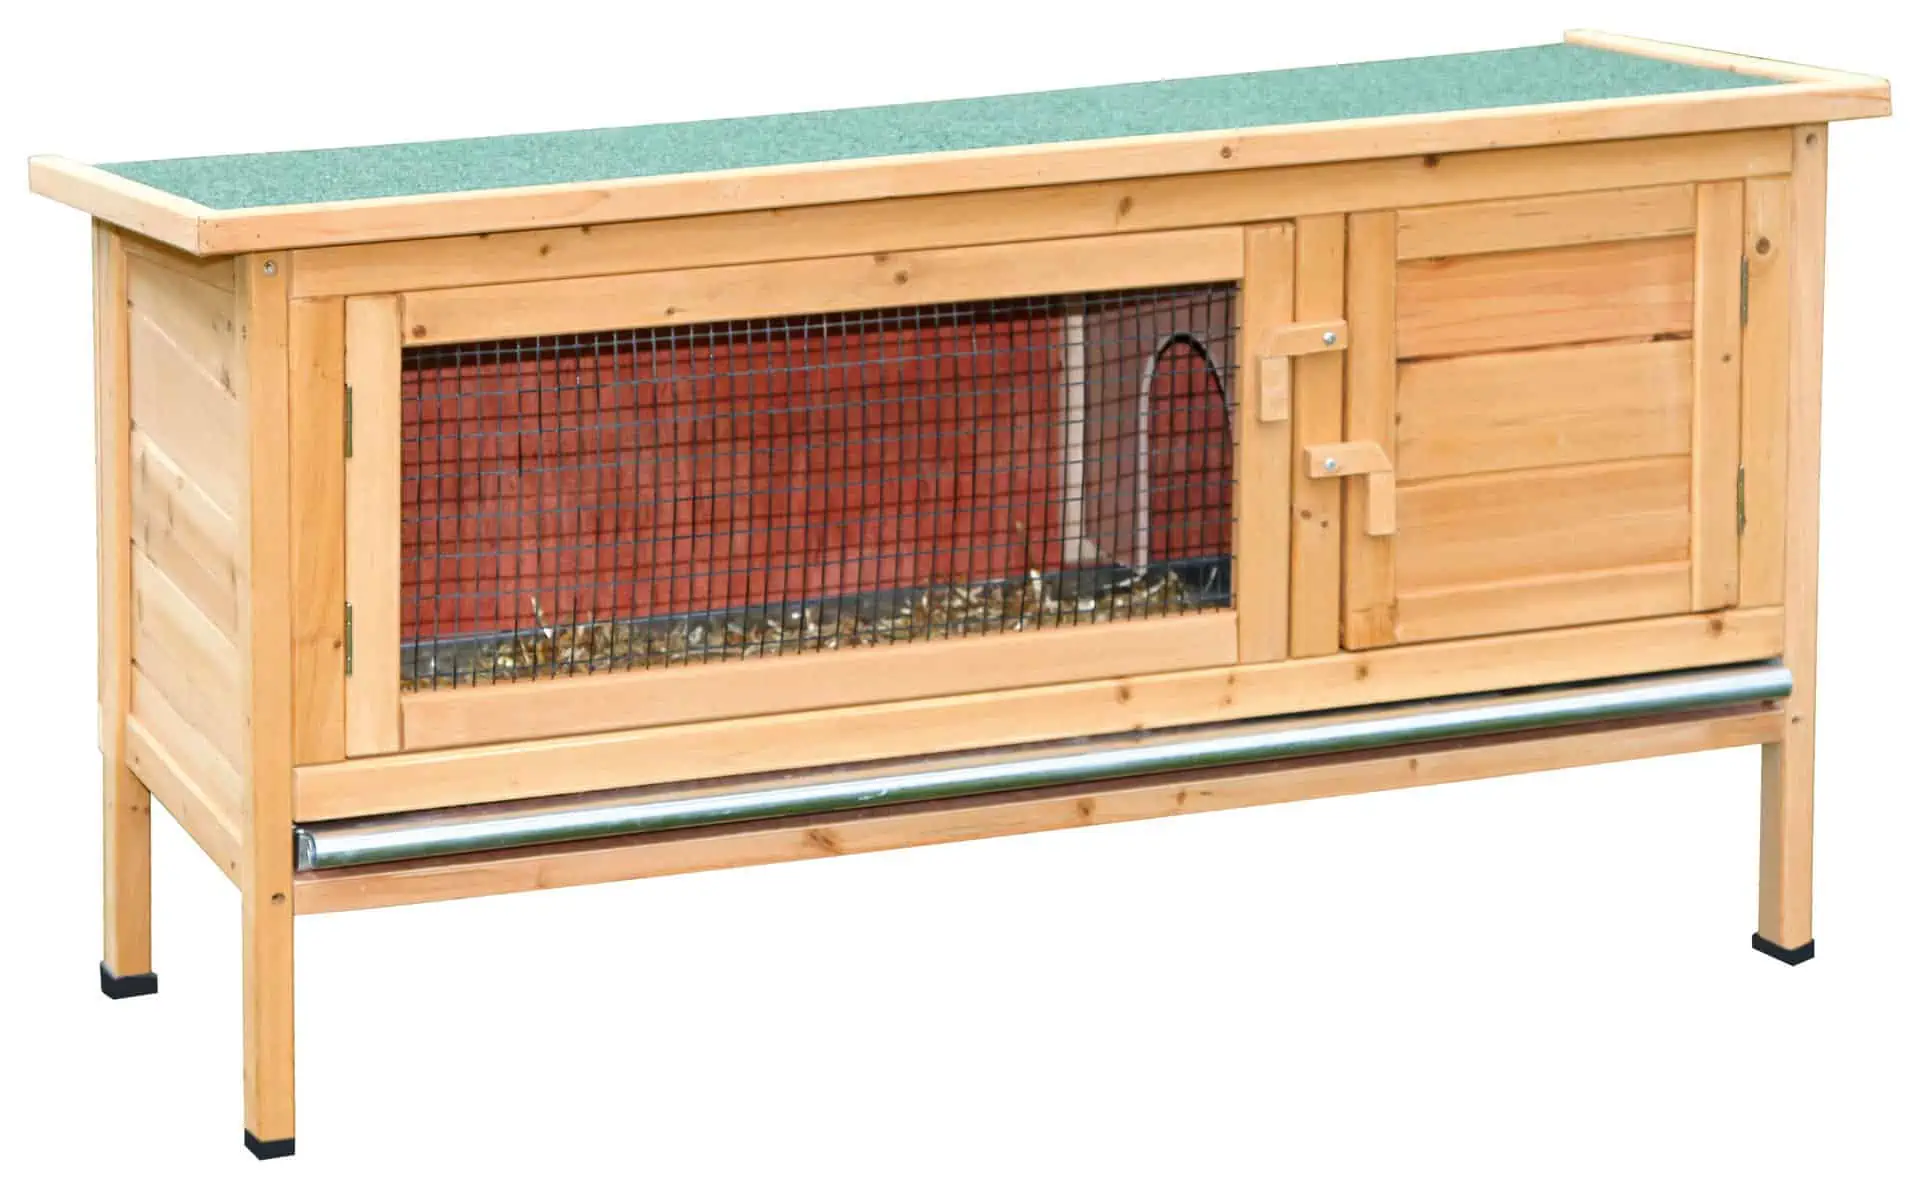 Rodent house Alfred 116 x 45 x 62 cm